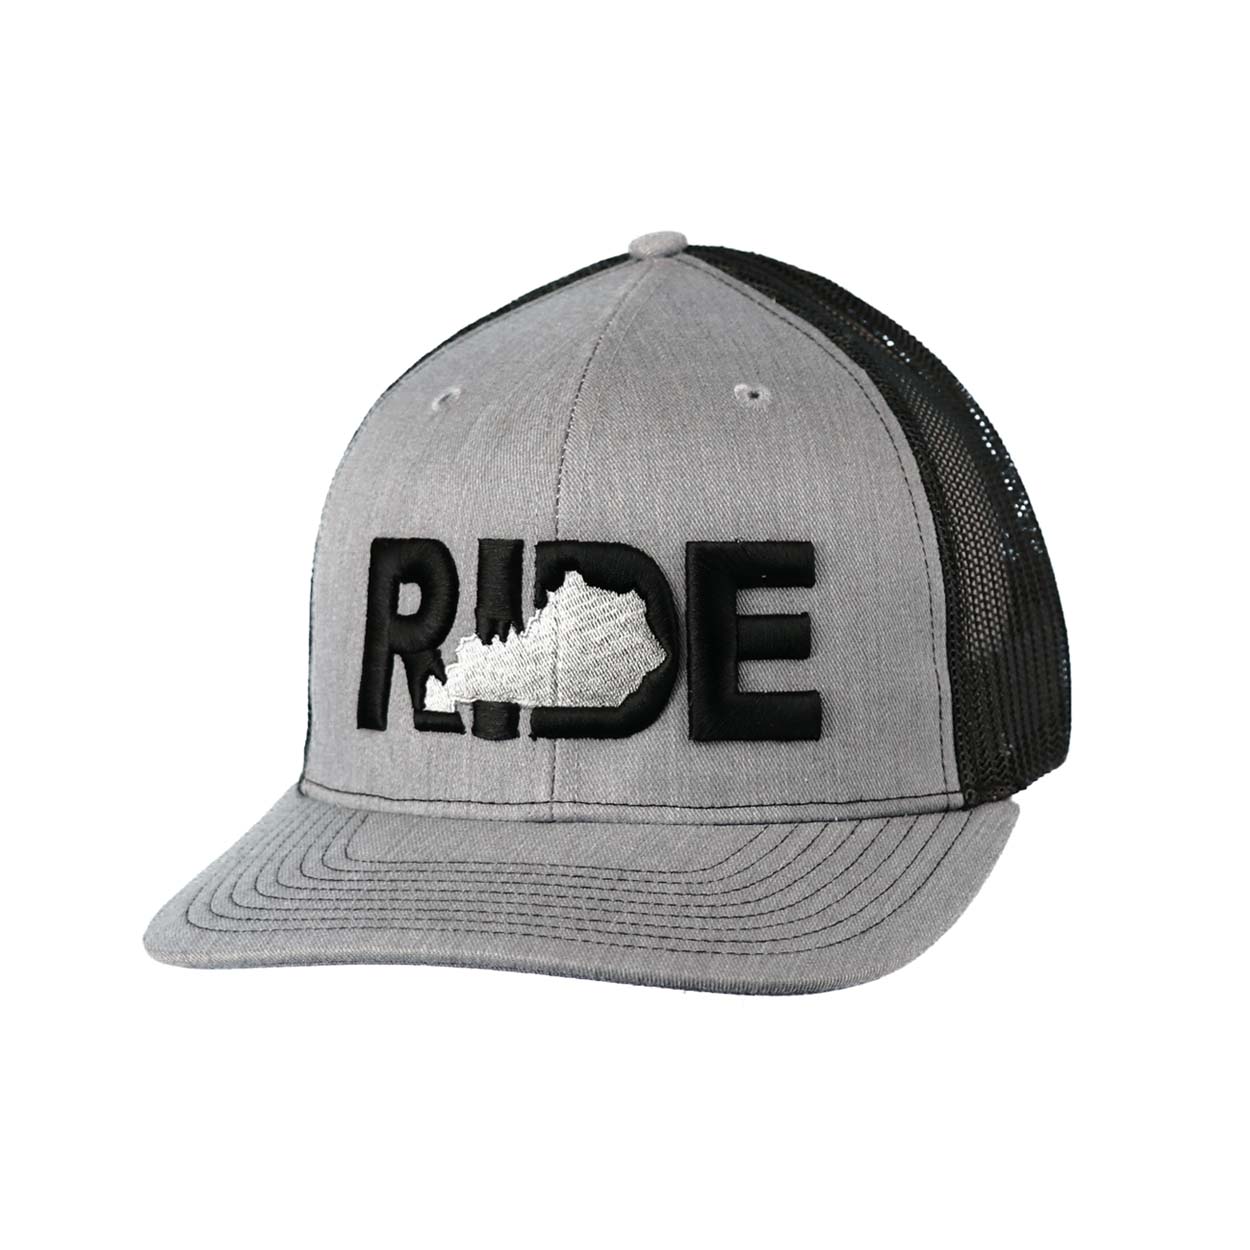 Ride Kentucky Classic Embroidered Snapback Trucker Hat Heather Gray/Black